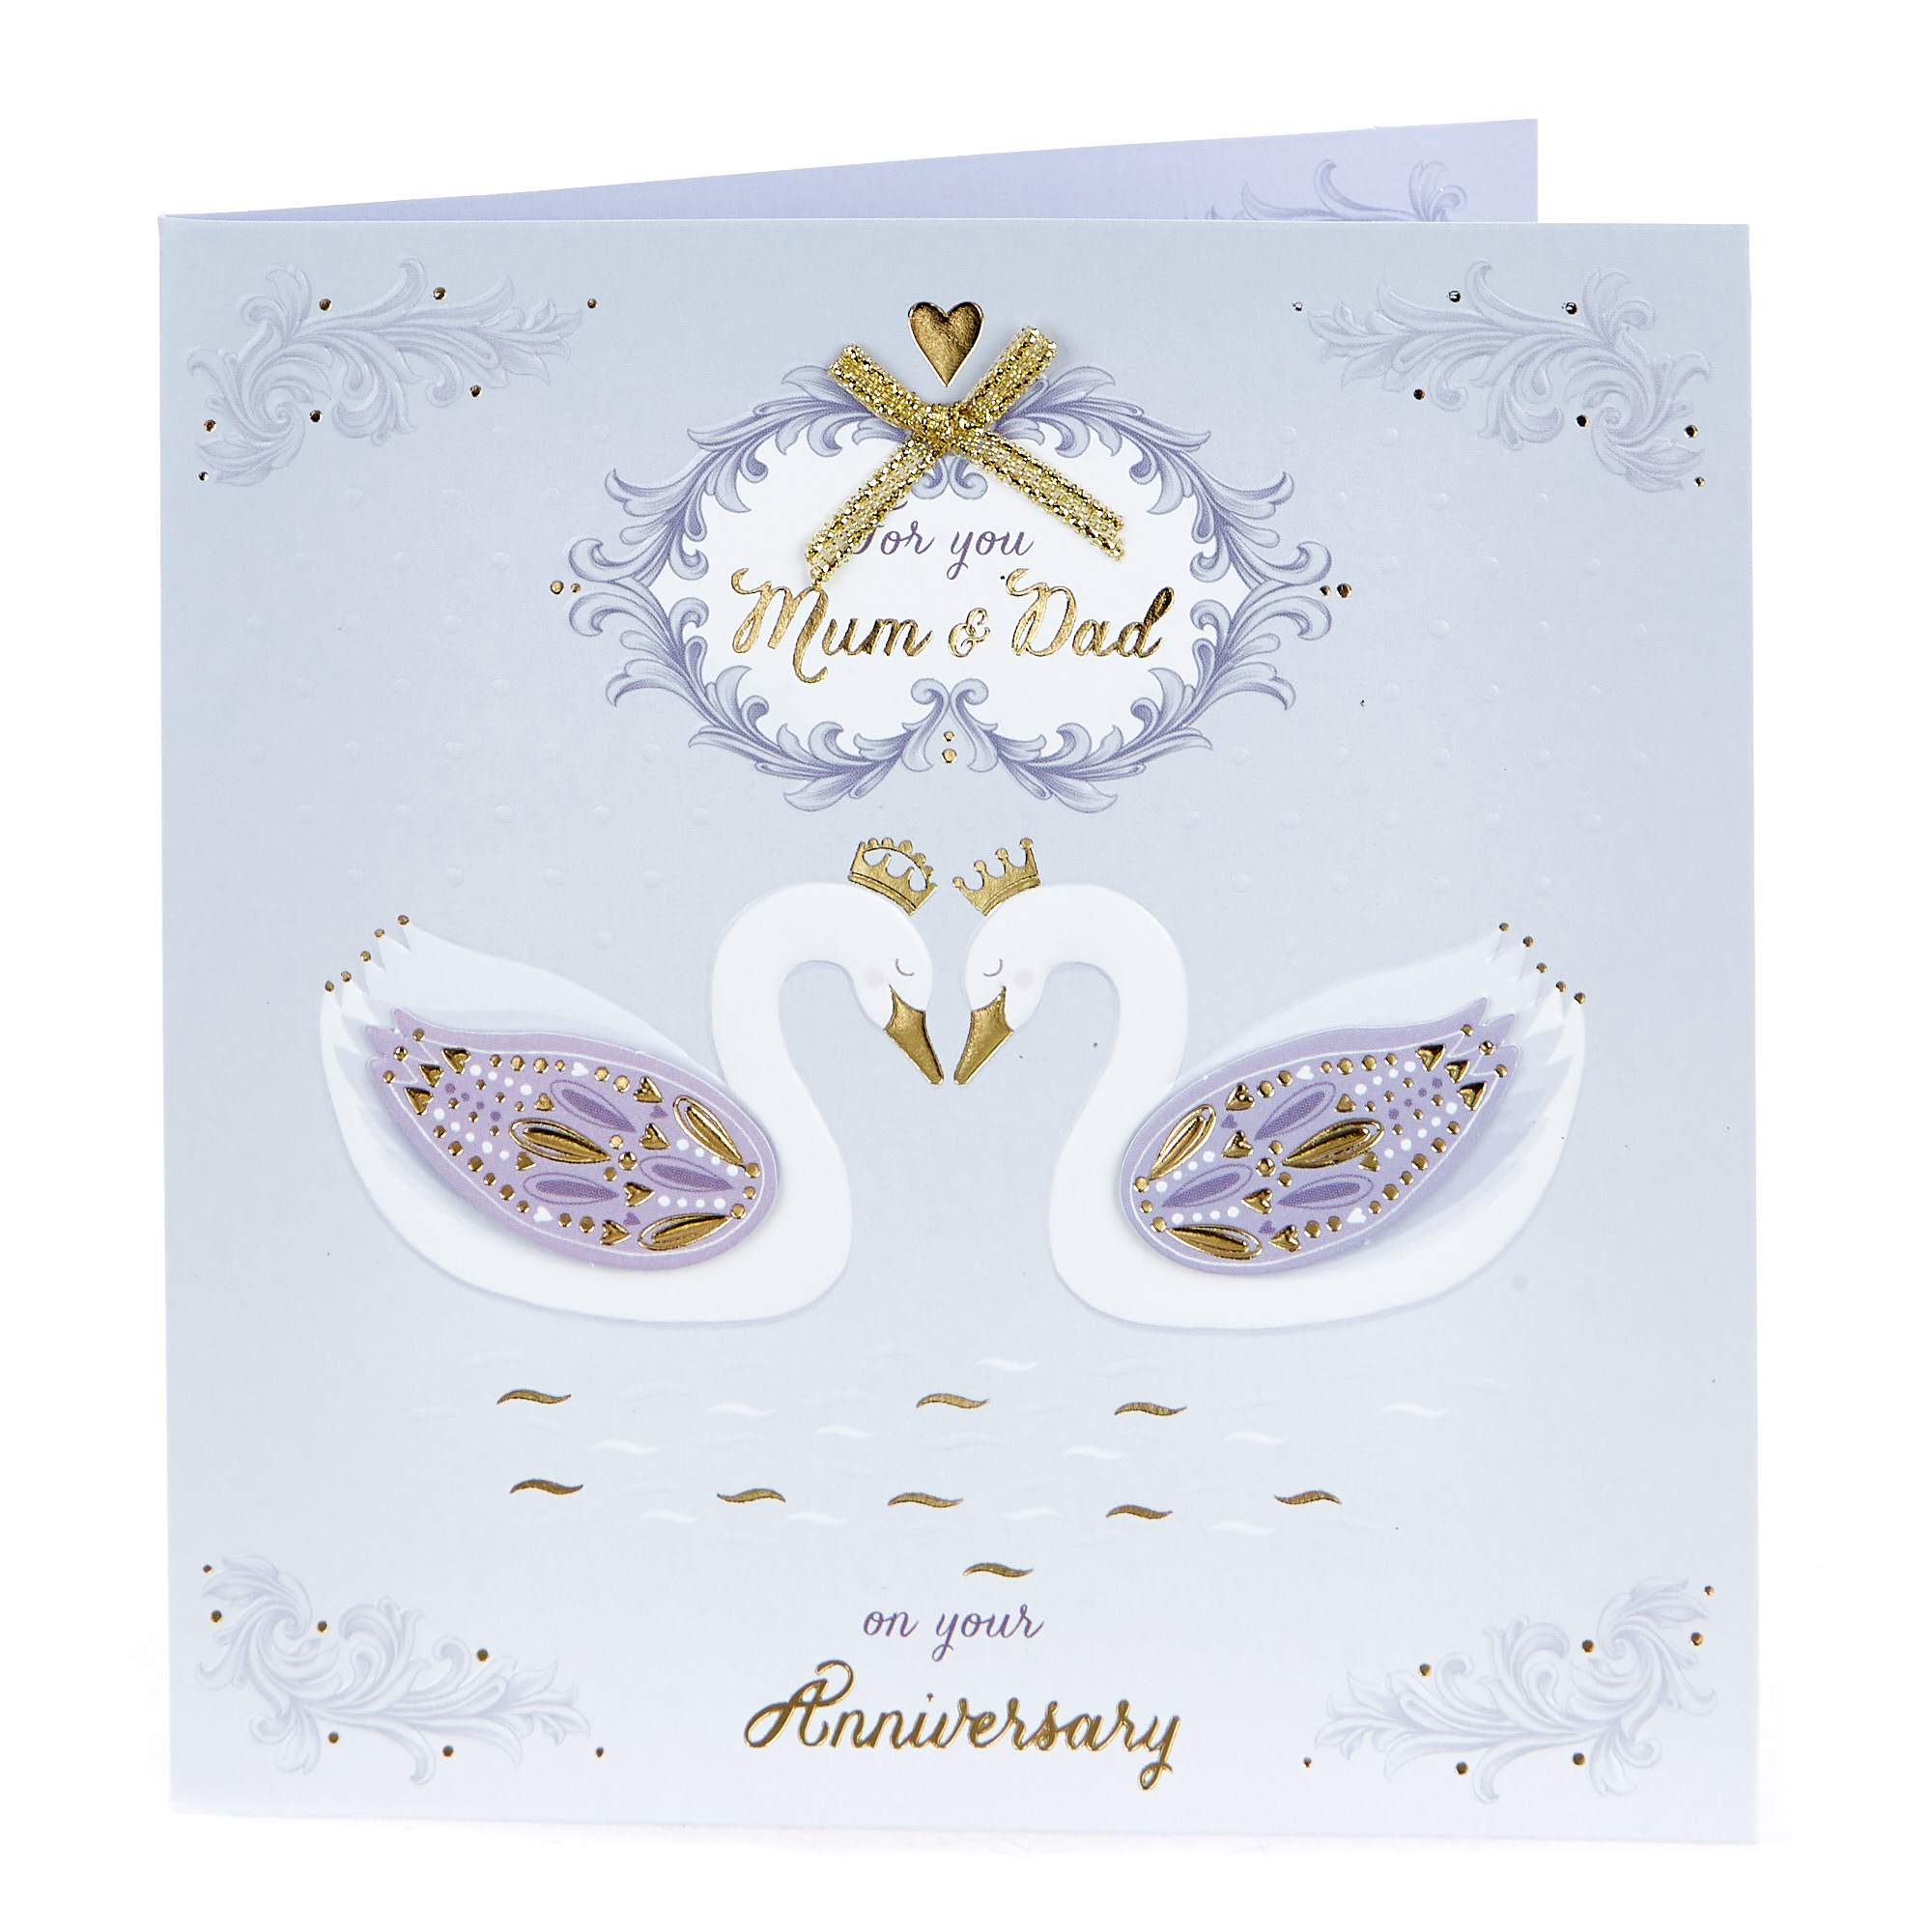 Boutique Collection Anniversary Card - Mum & Dad, Swans